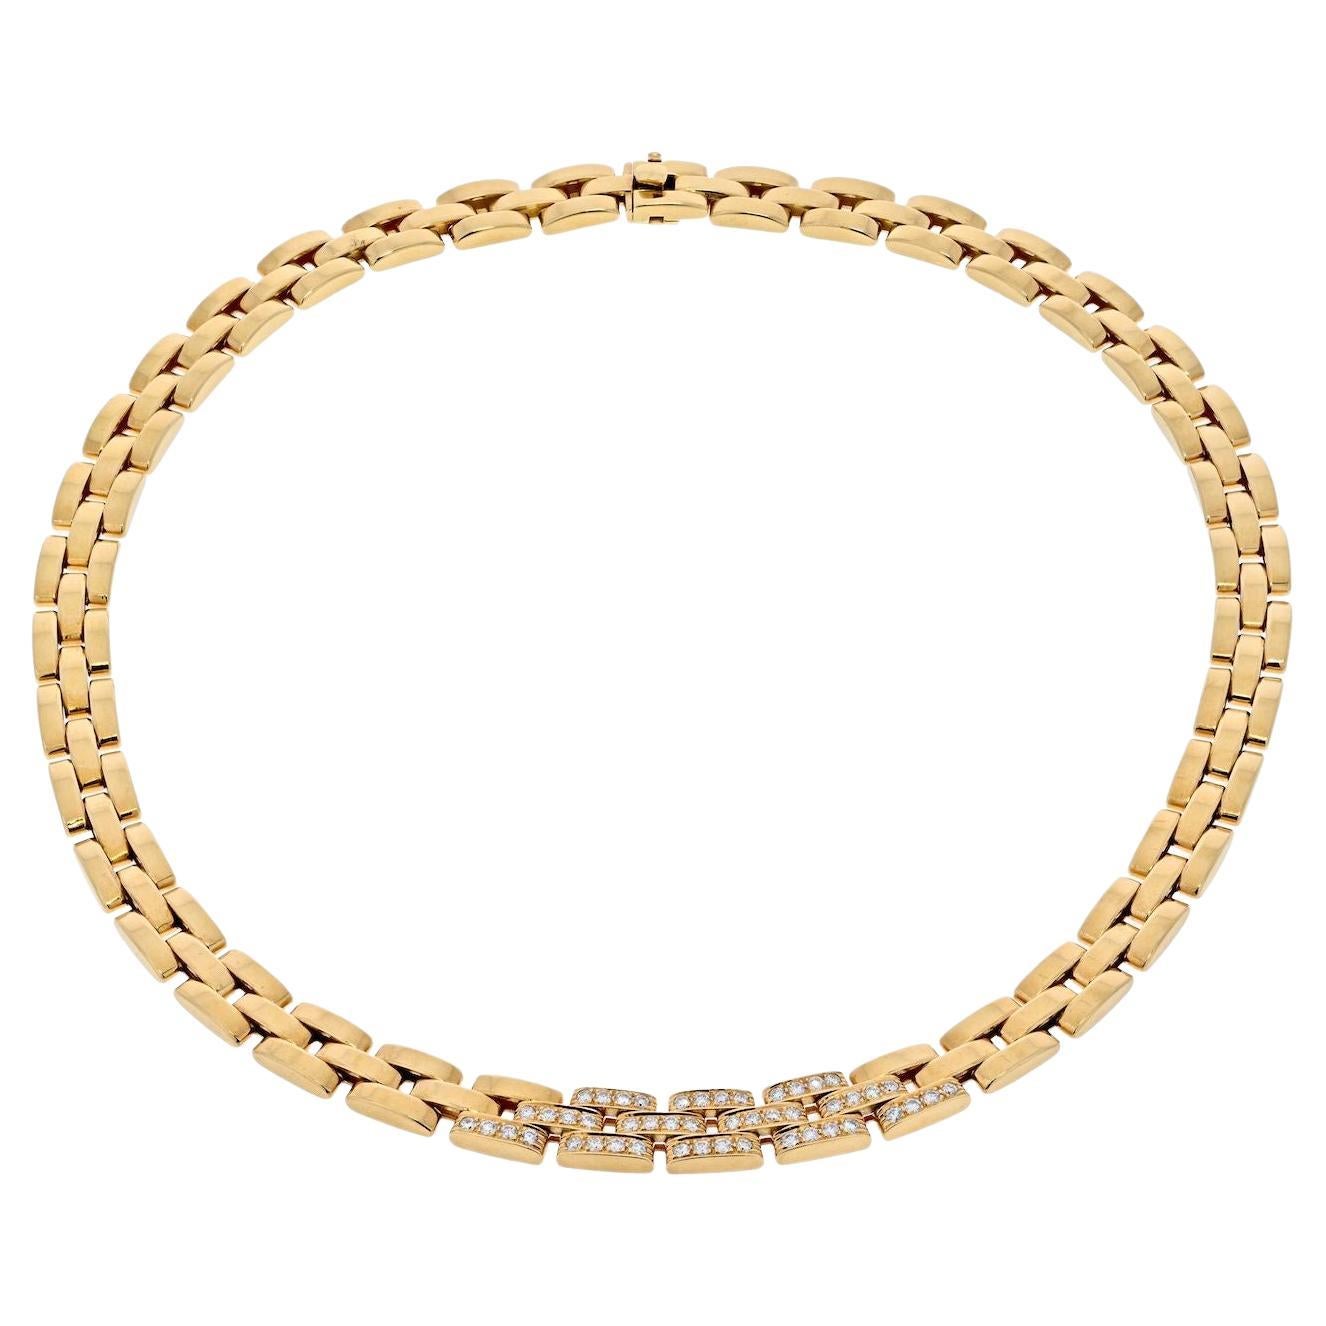 Cartier 18K Yellow Gold Diamond Maillon Panthere Triple Row Necklace